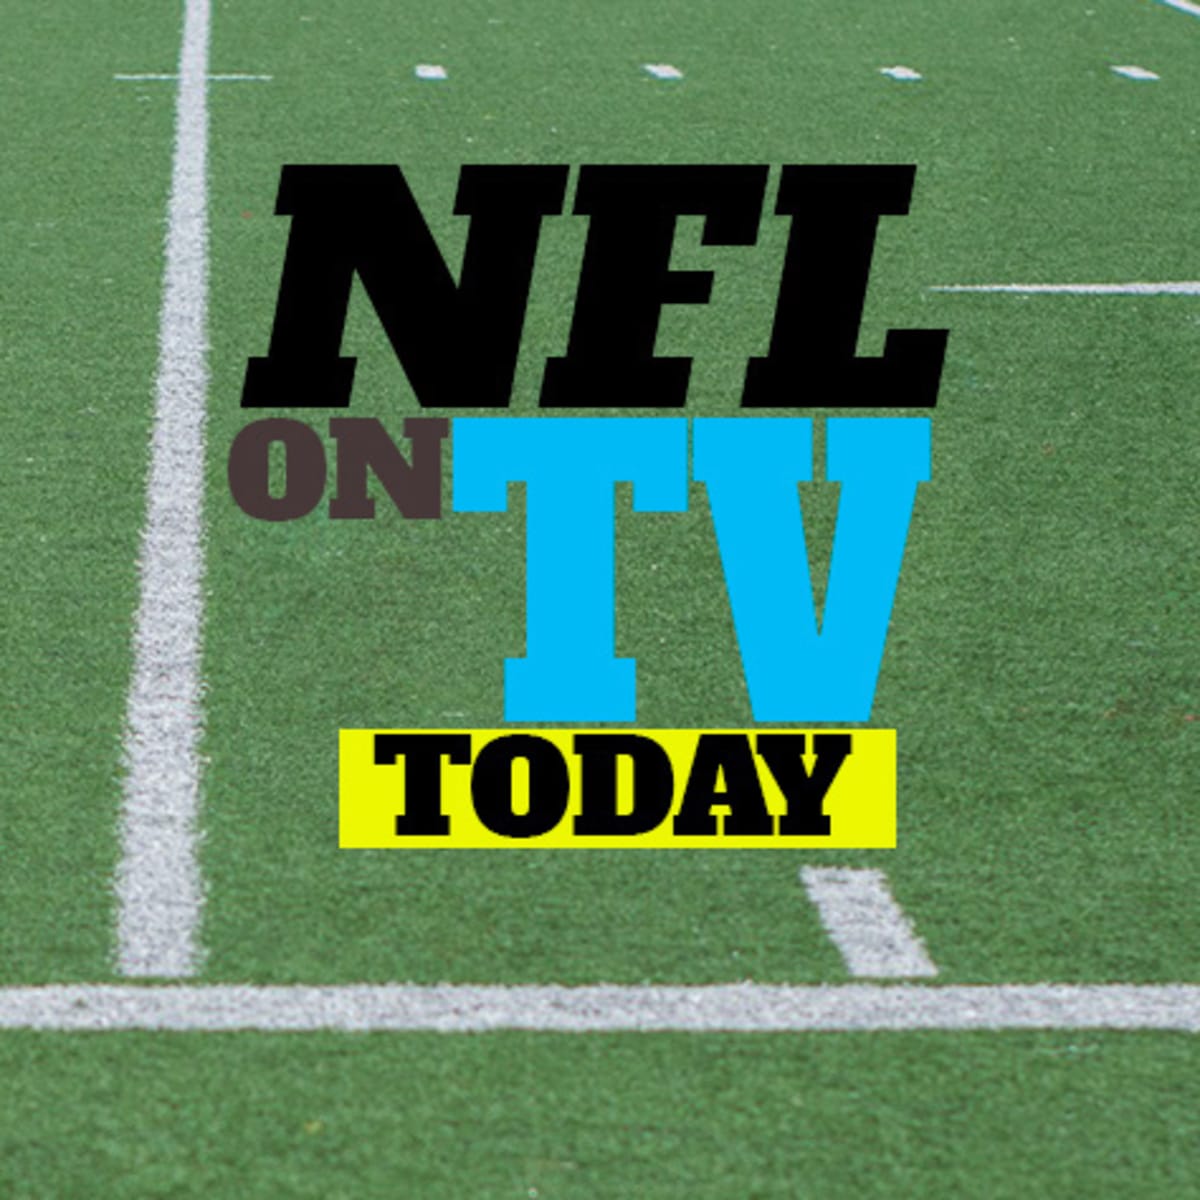 channel is the nfl game on today